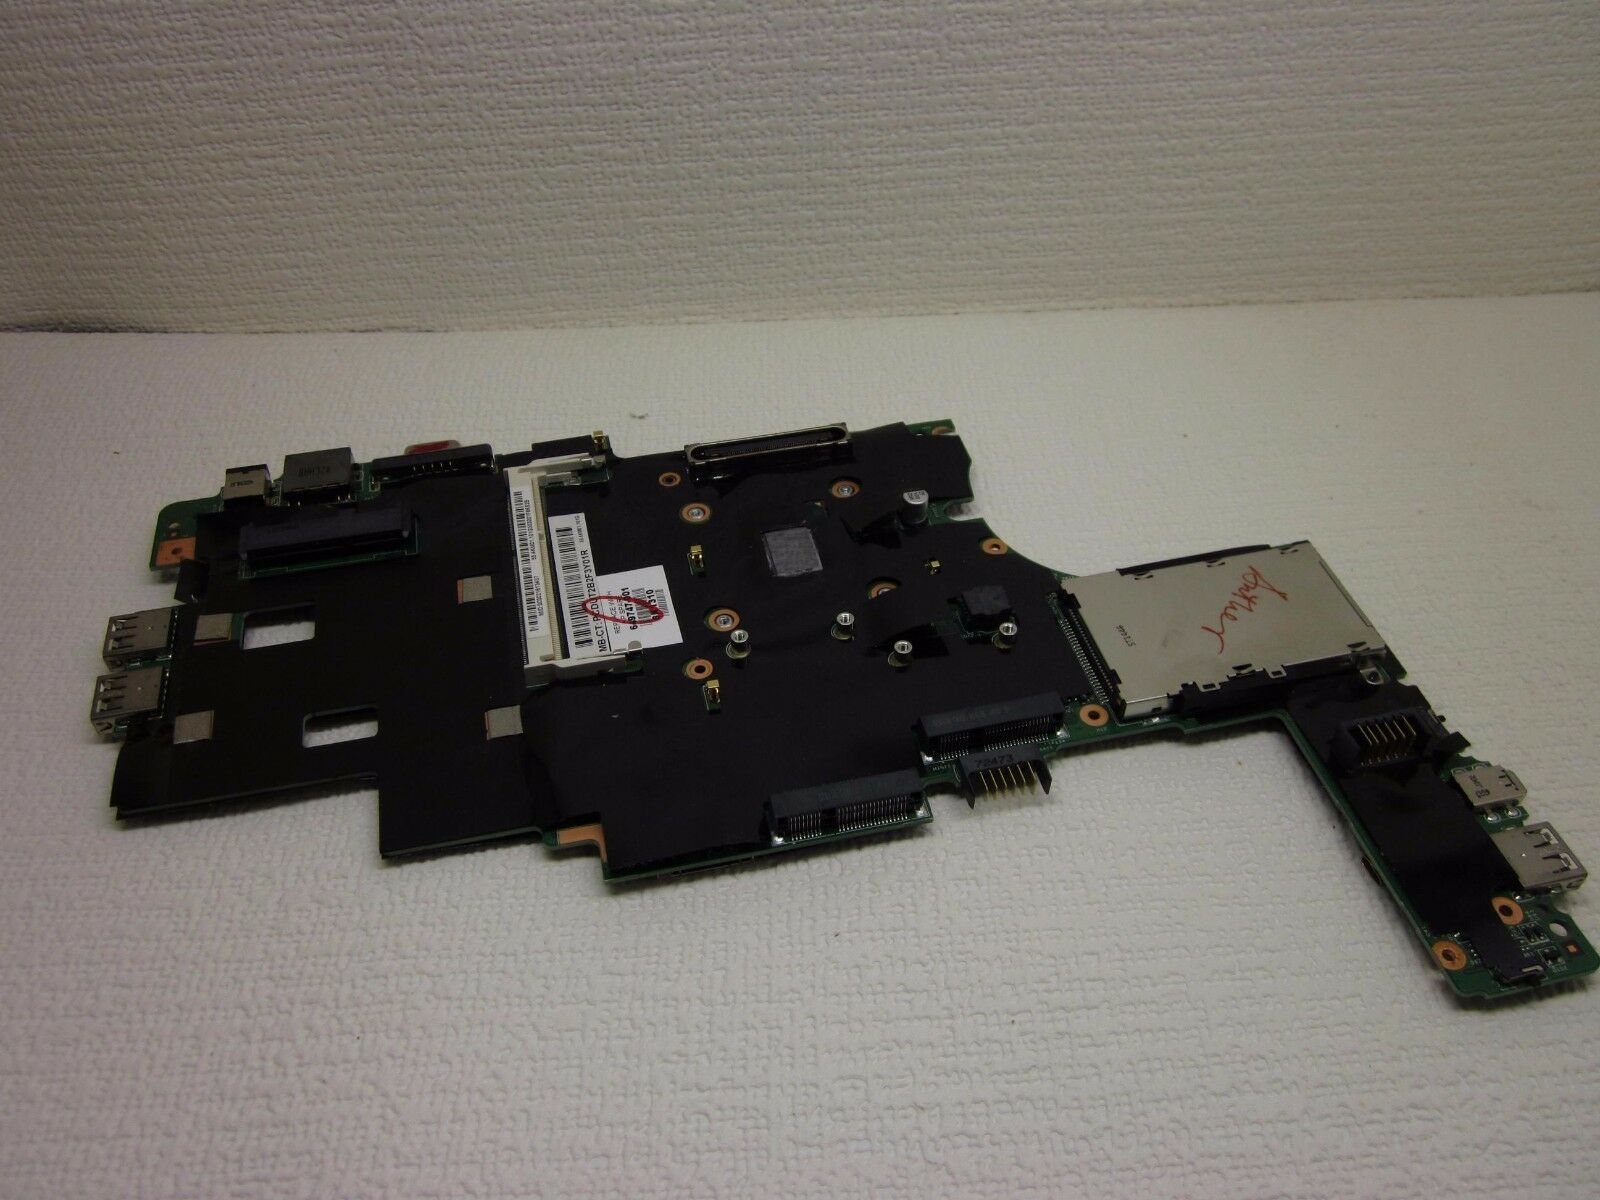 HP EliteBook 2760P laptop motherboard with i5 CPU 649747-001 Good Up for sale is a - HP EliteBook 2760P l